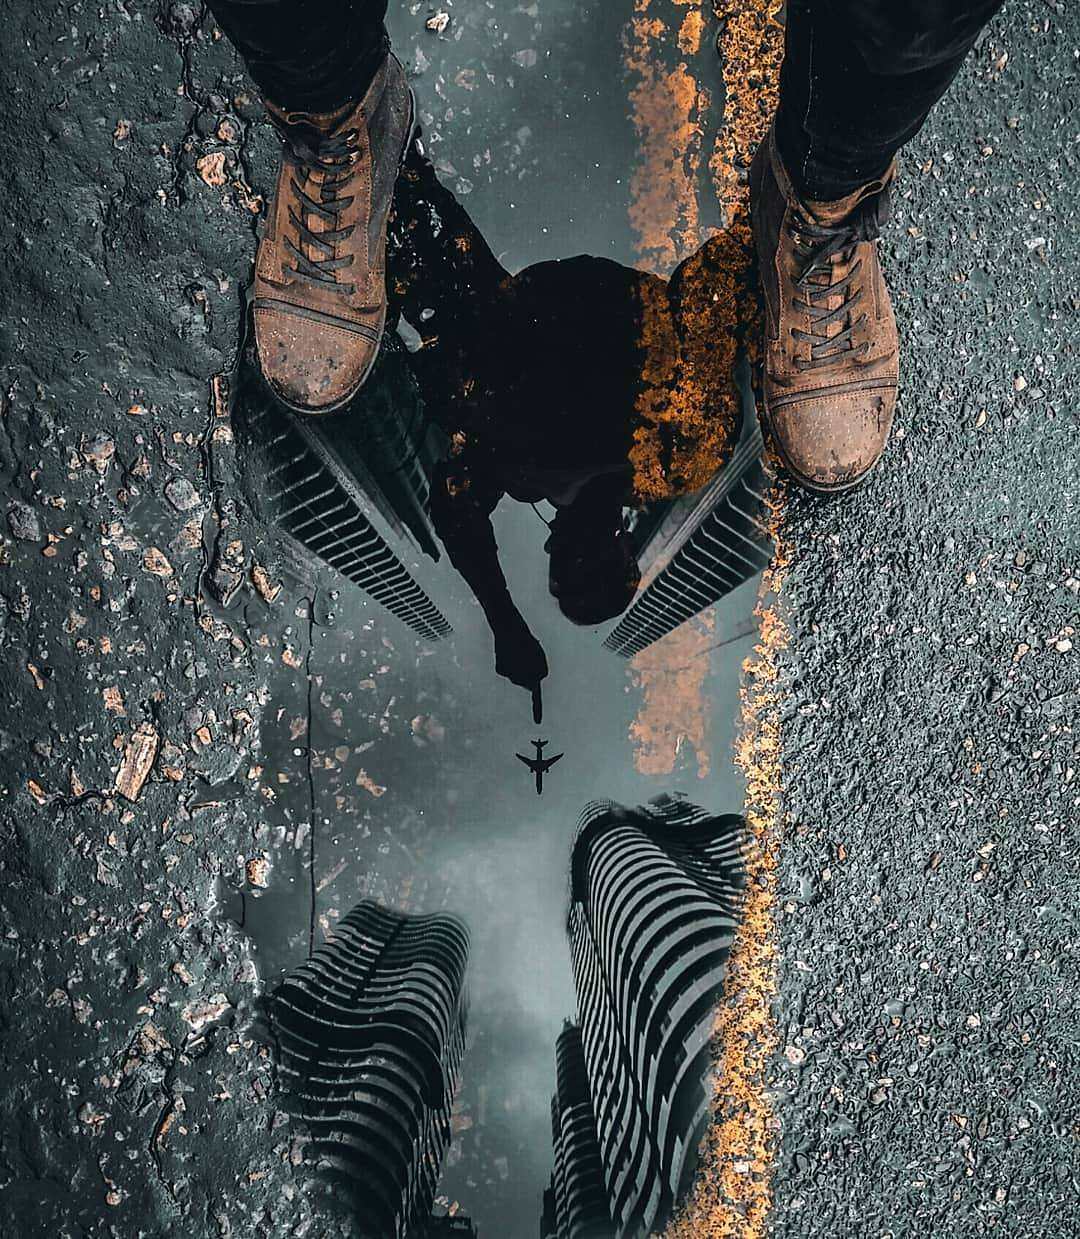 view into the upside down